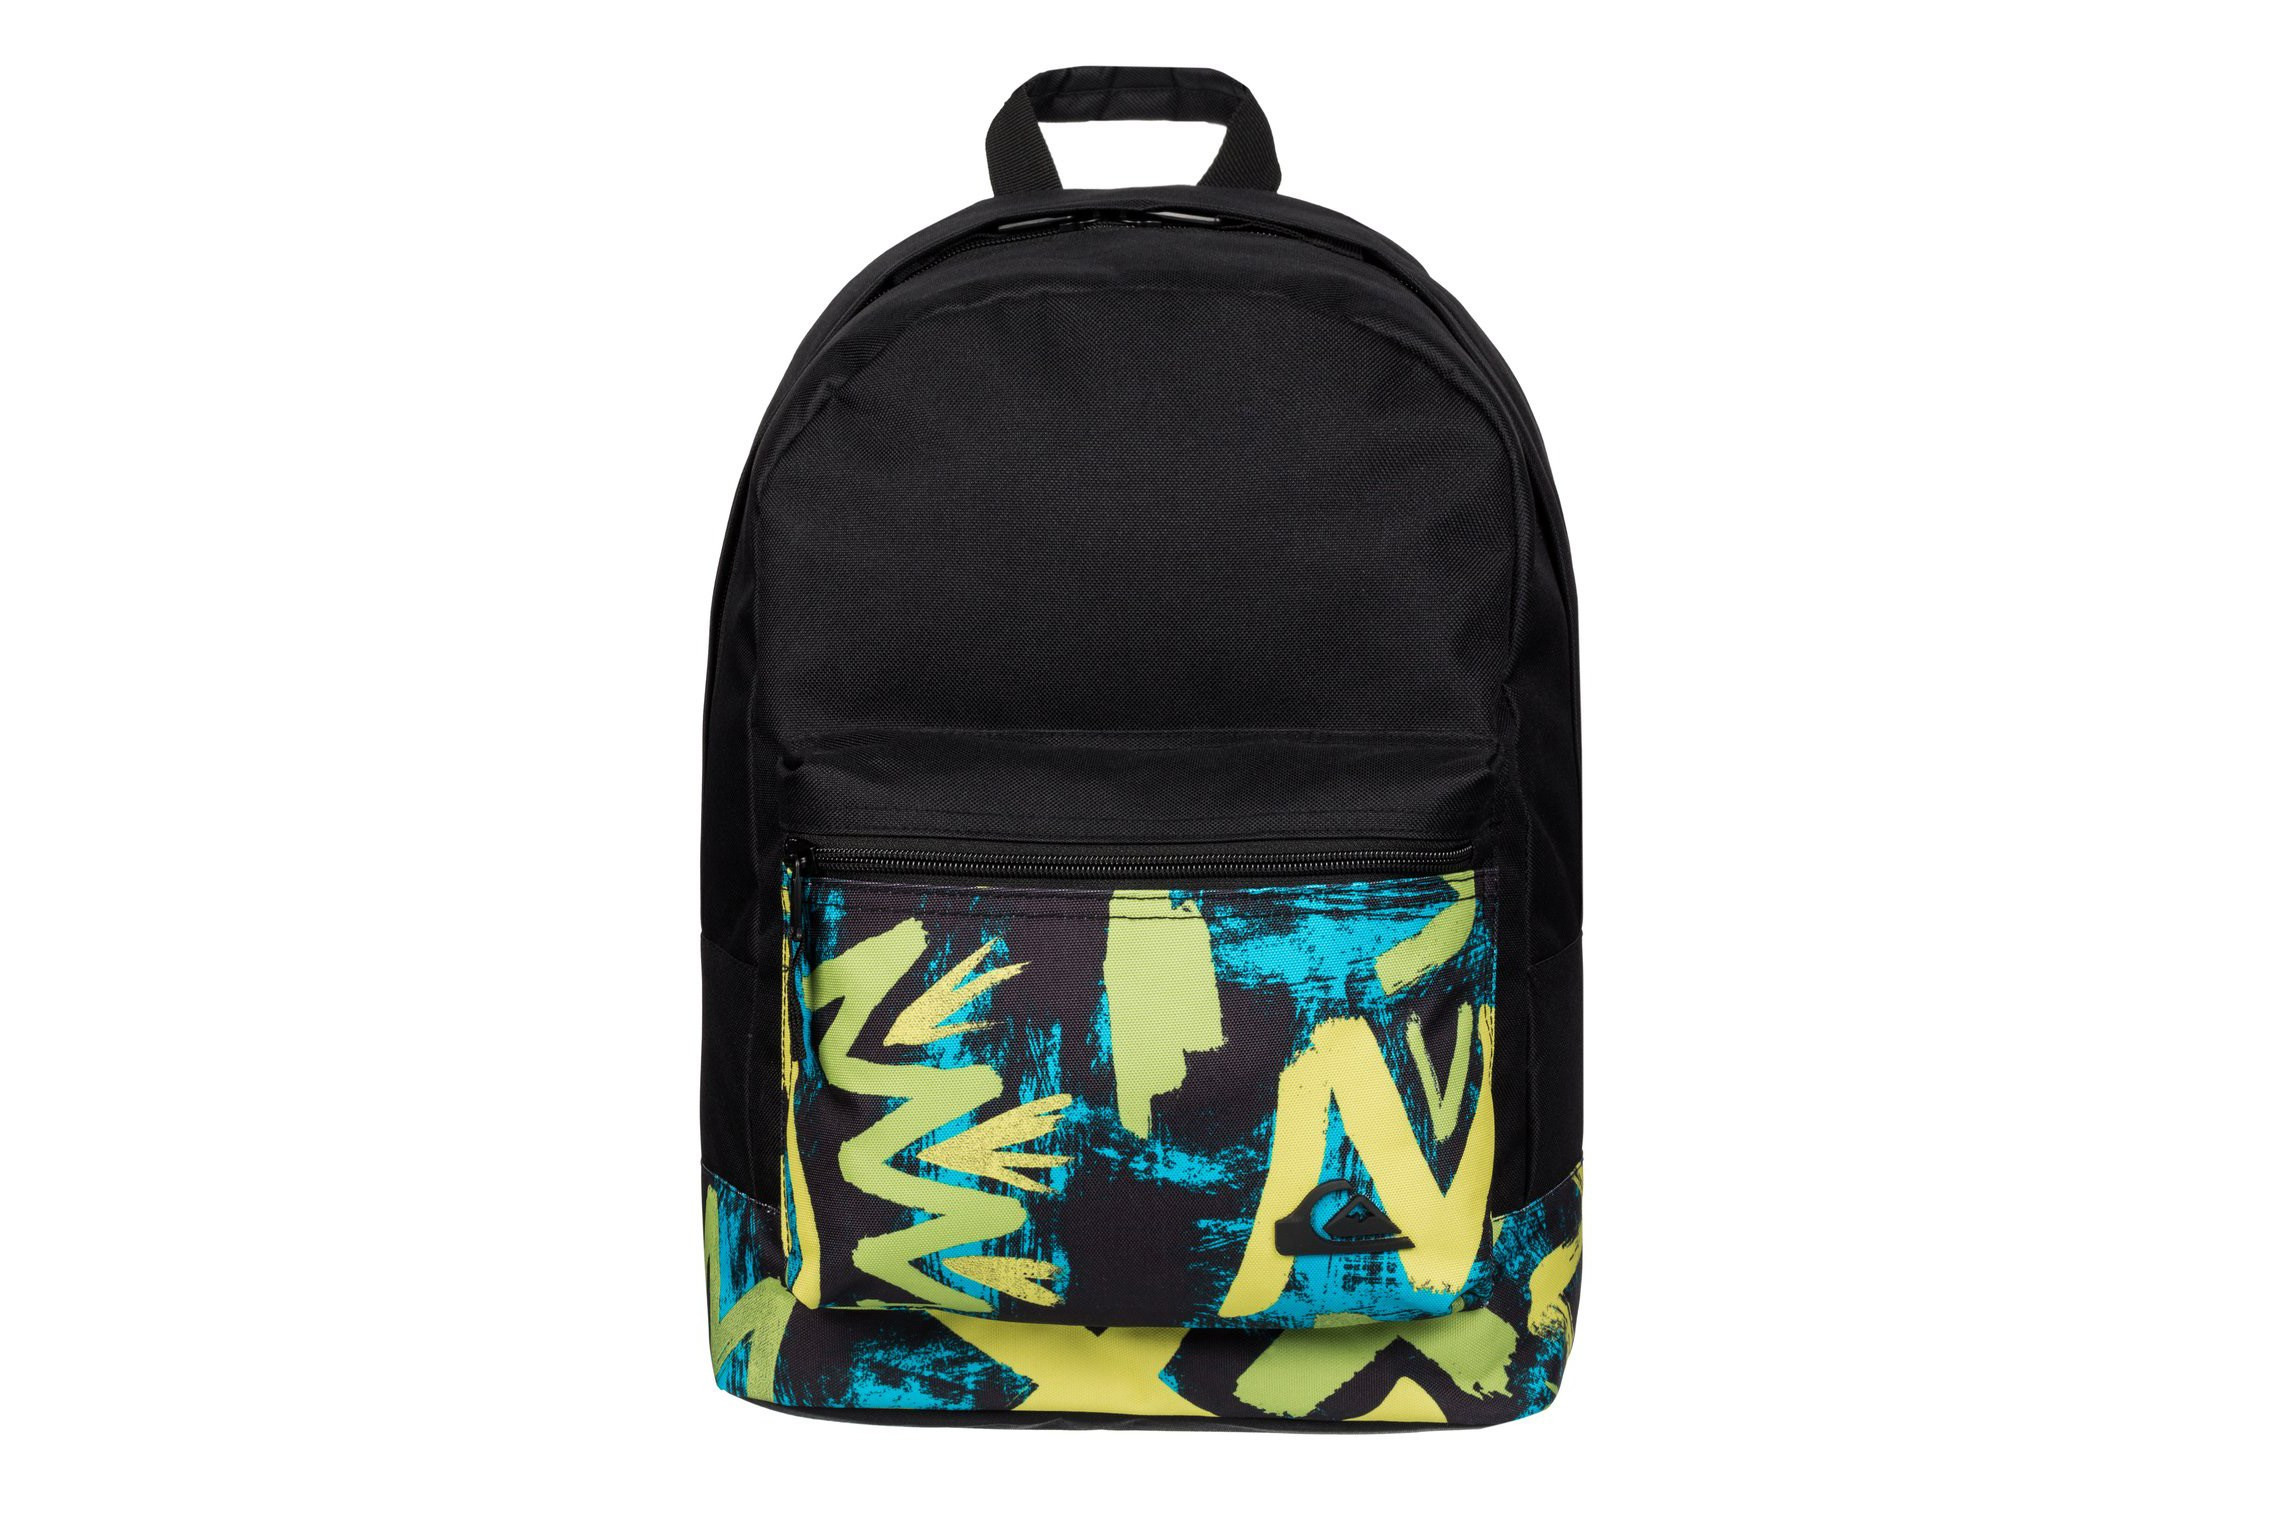 Back To School Backpacks
 The Best Affordable Back to School Backpacks